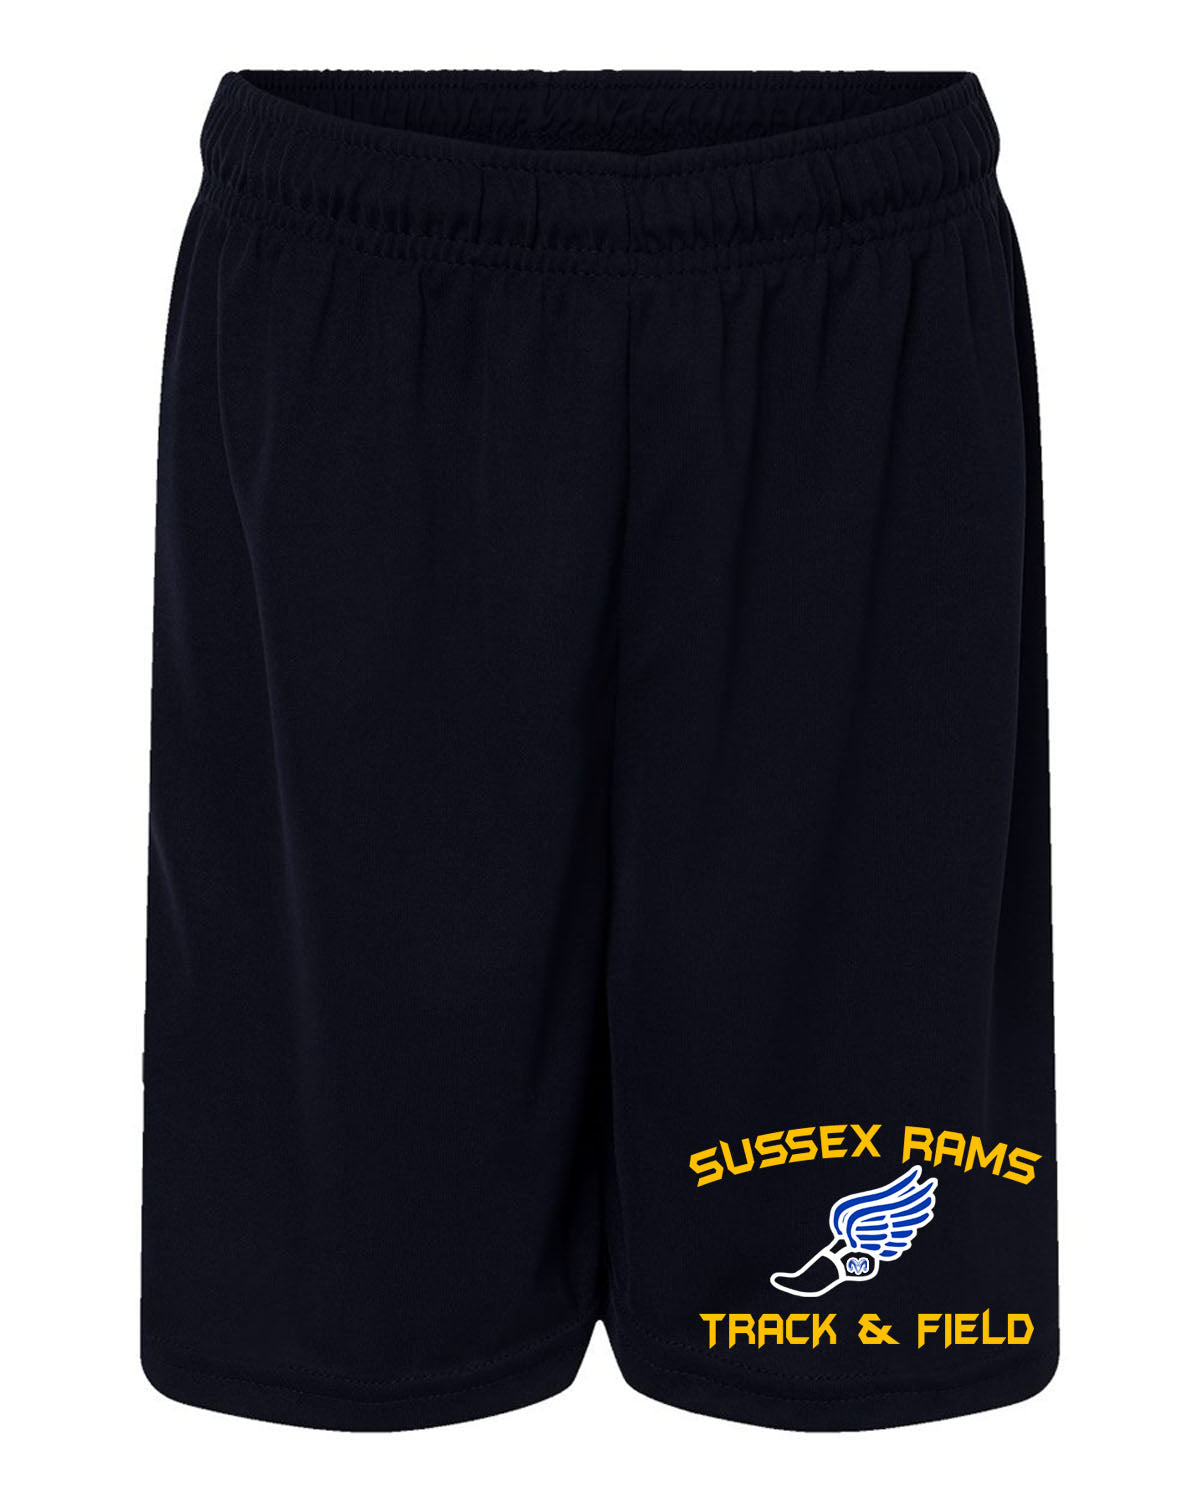 Sussex Rams Track Performance Shorts Design 2